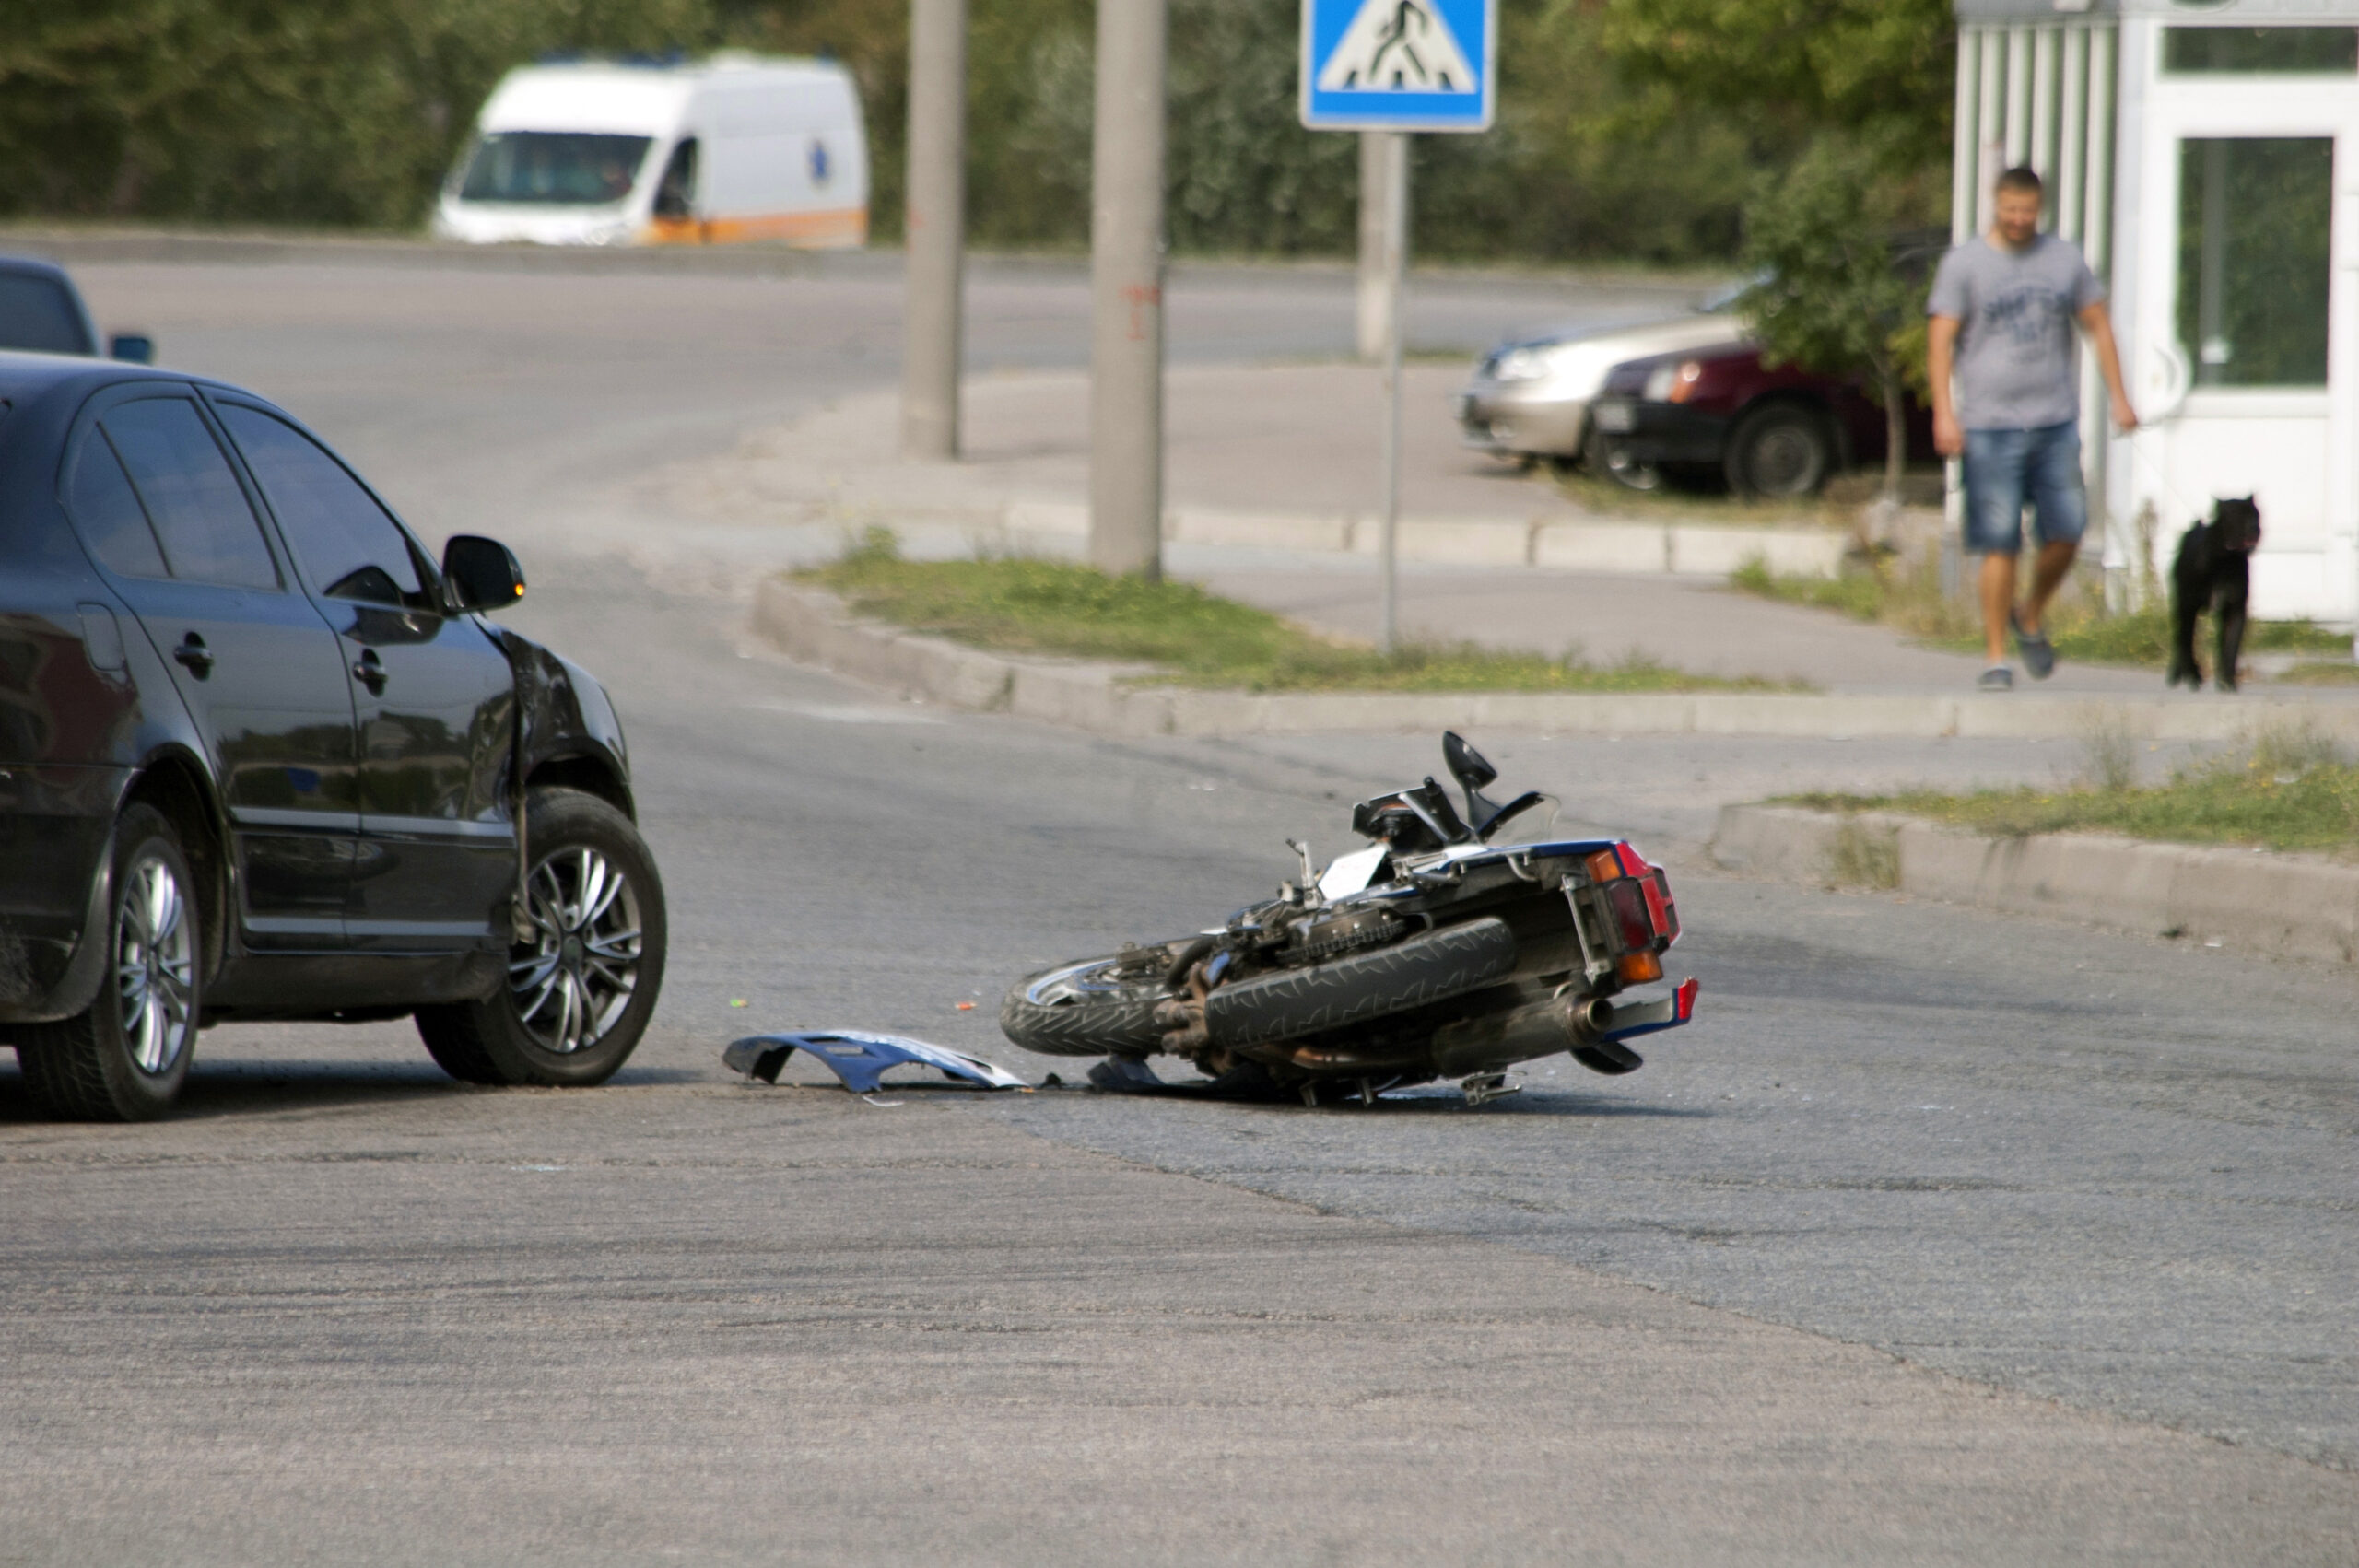 Scene after a motorcycle and black car crashed. Man walking his dog in the distance